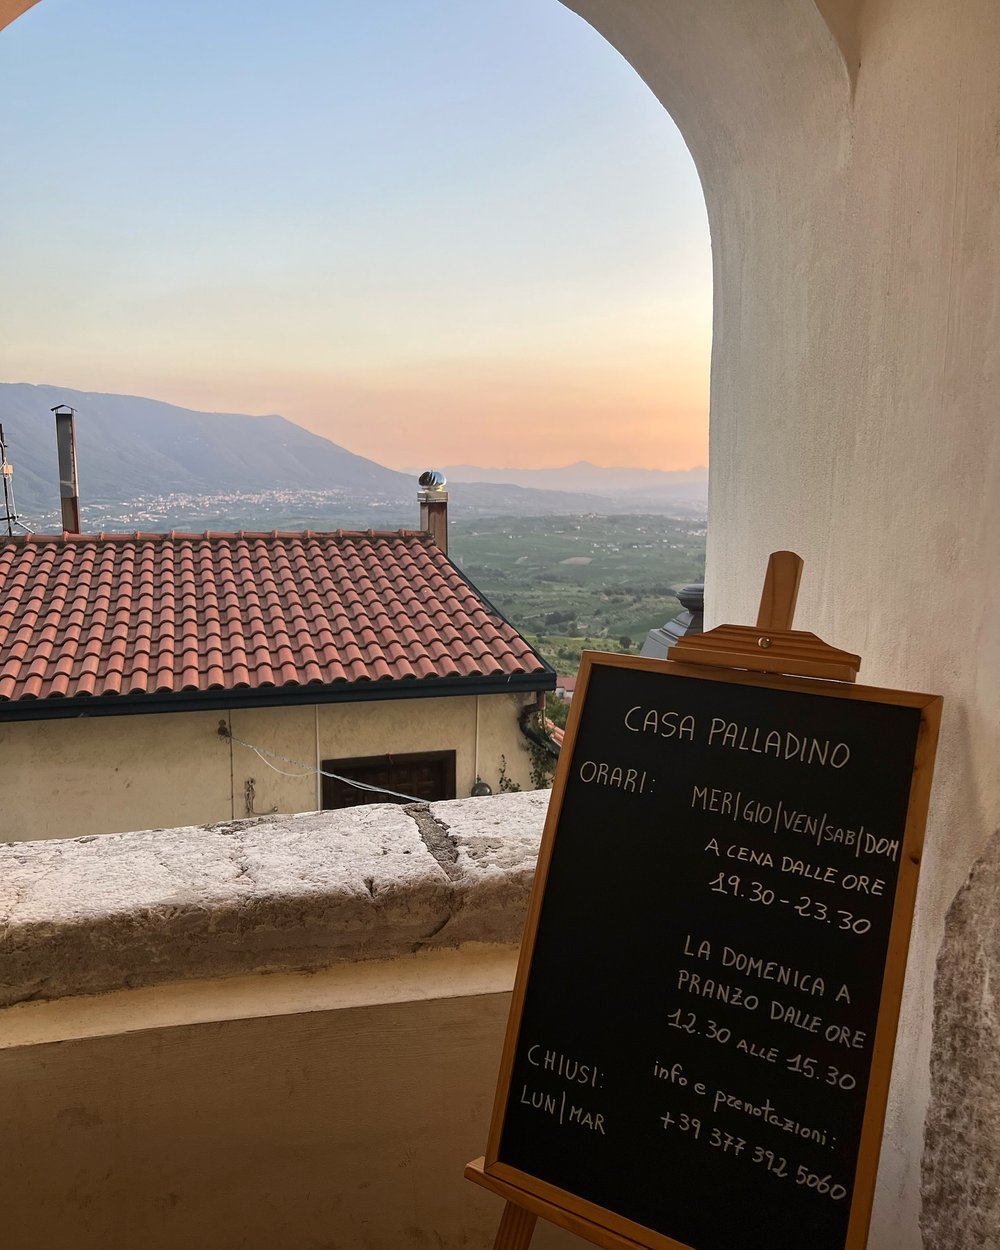 Italy Slow Life Series 106: Sunsets and Views

As much as I love to travel, I miss this view #guardiasanframondi 

Then when I&rsquo;m home 🇮🇹, I&rsquo;m longing to travel. It now takes me about a month before I start looking at flights again.  But